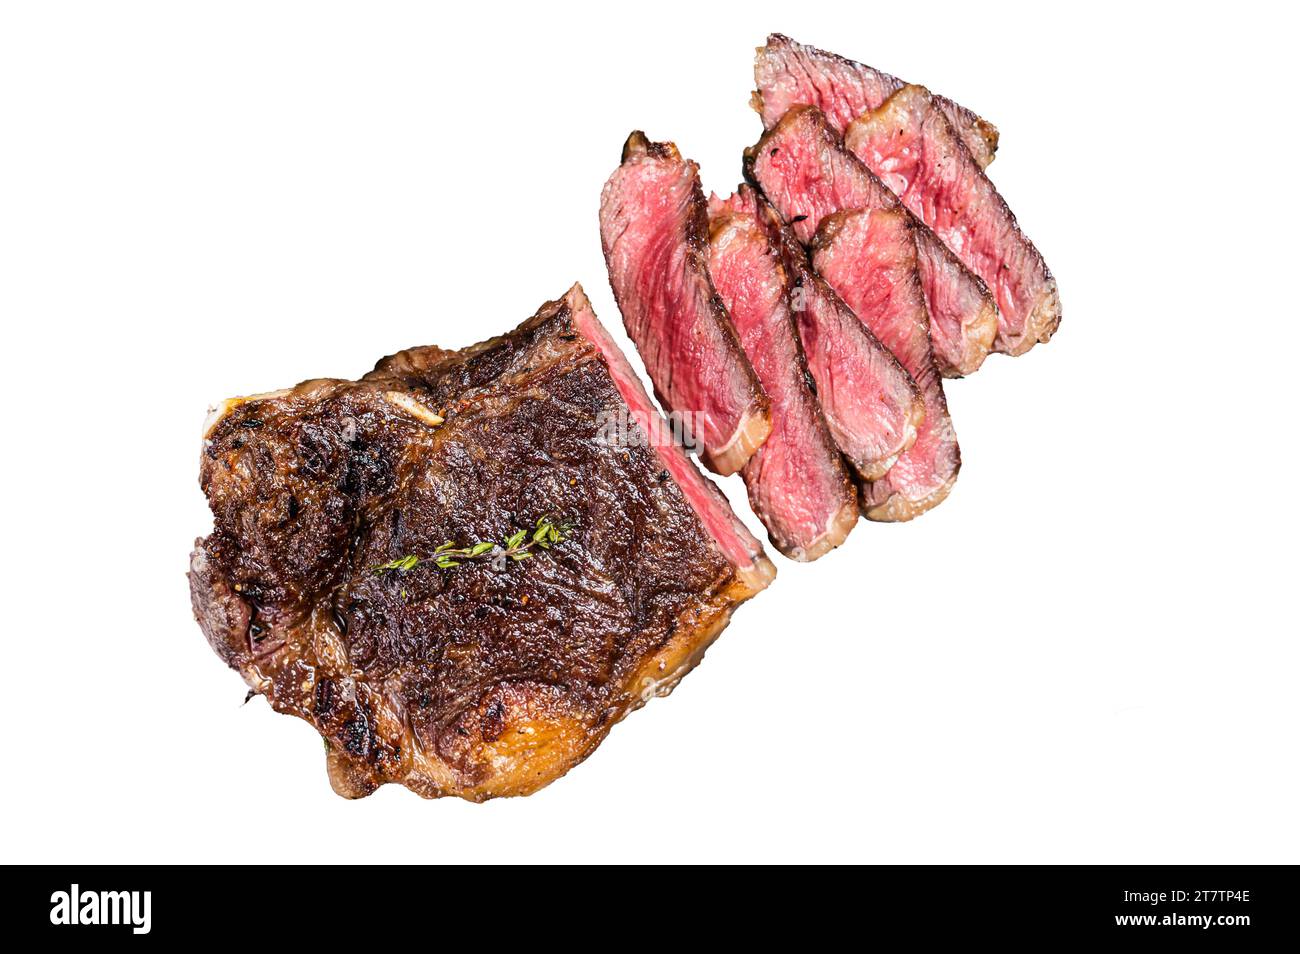 Grilled Wagyu Striploin beef meat steak or new york steak in a steel tray. Isolated, white background Stock Photo